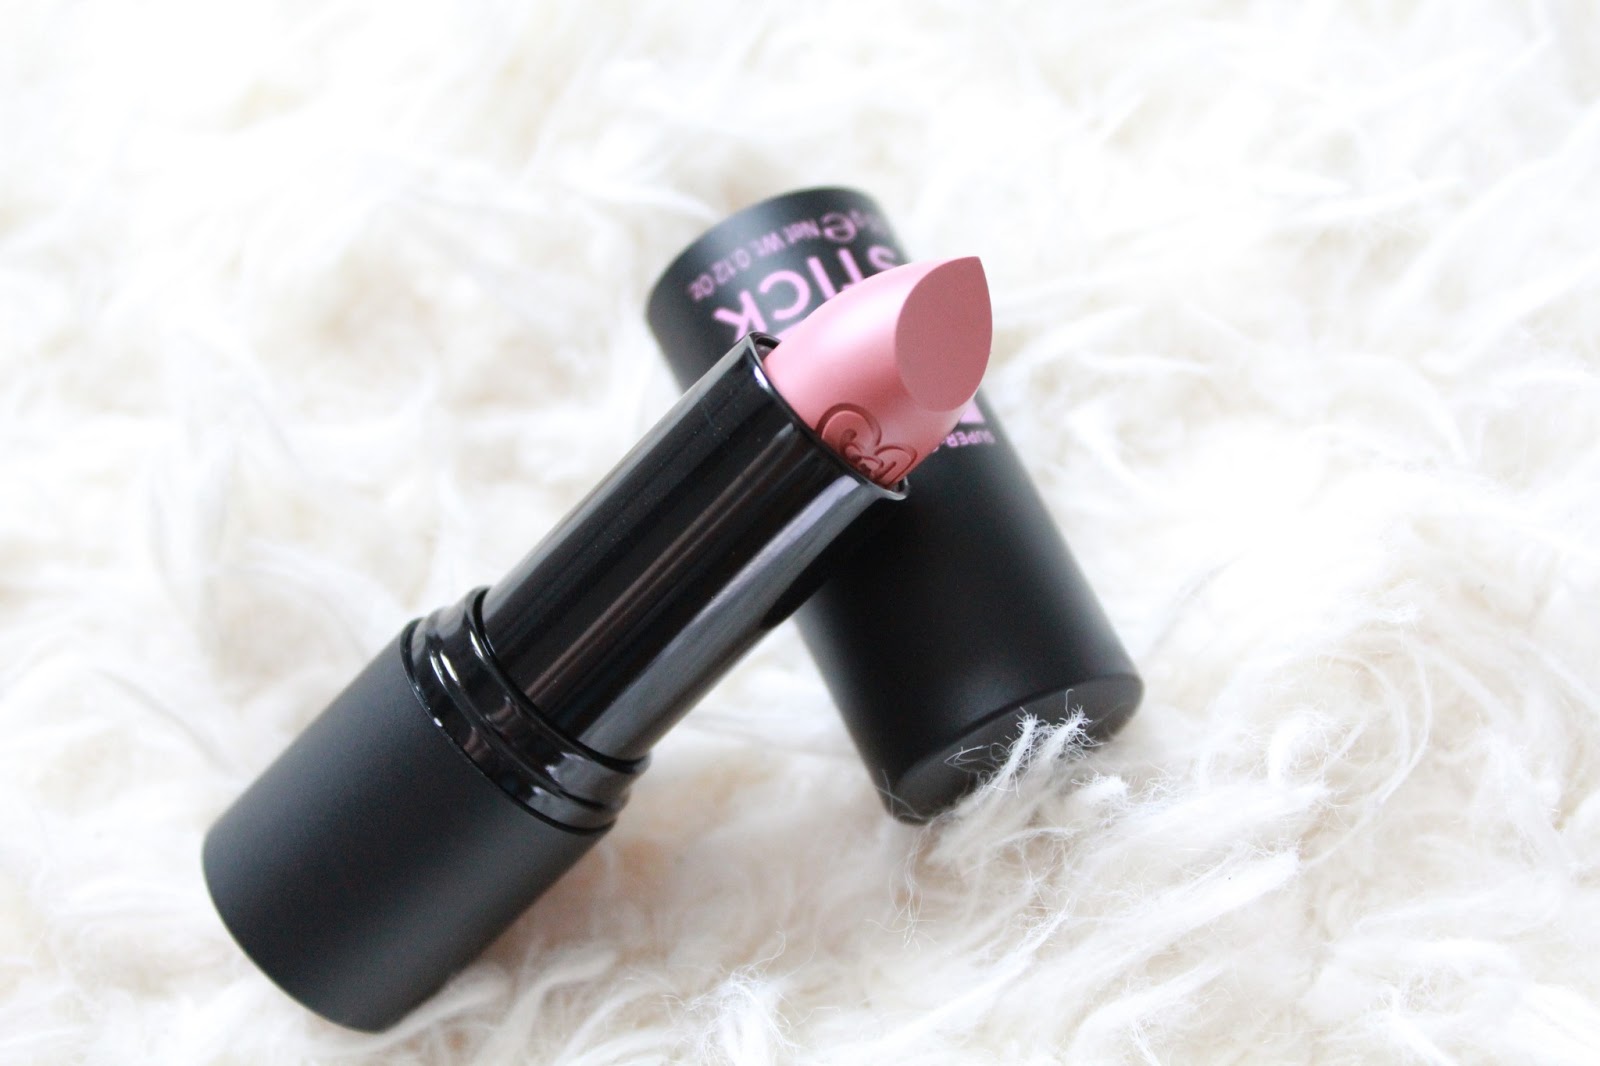 Soap And Glory Super Colour Fabu Lip Stick In Supernude Inthefrow